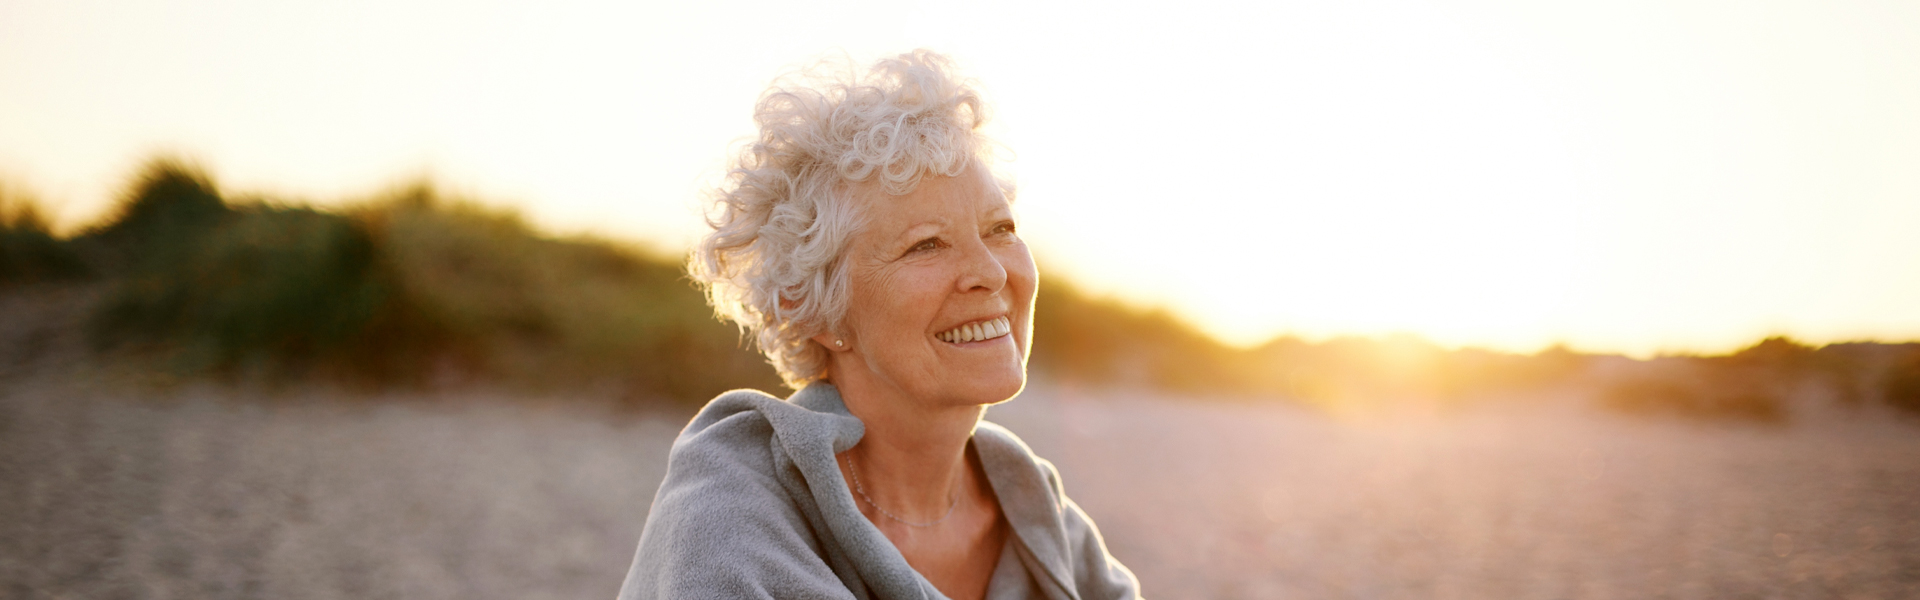 What You Should Know About Implant-Supported Dentures